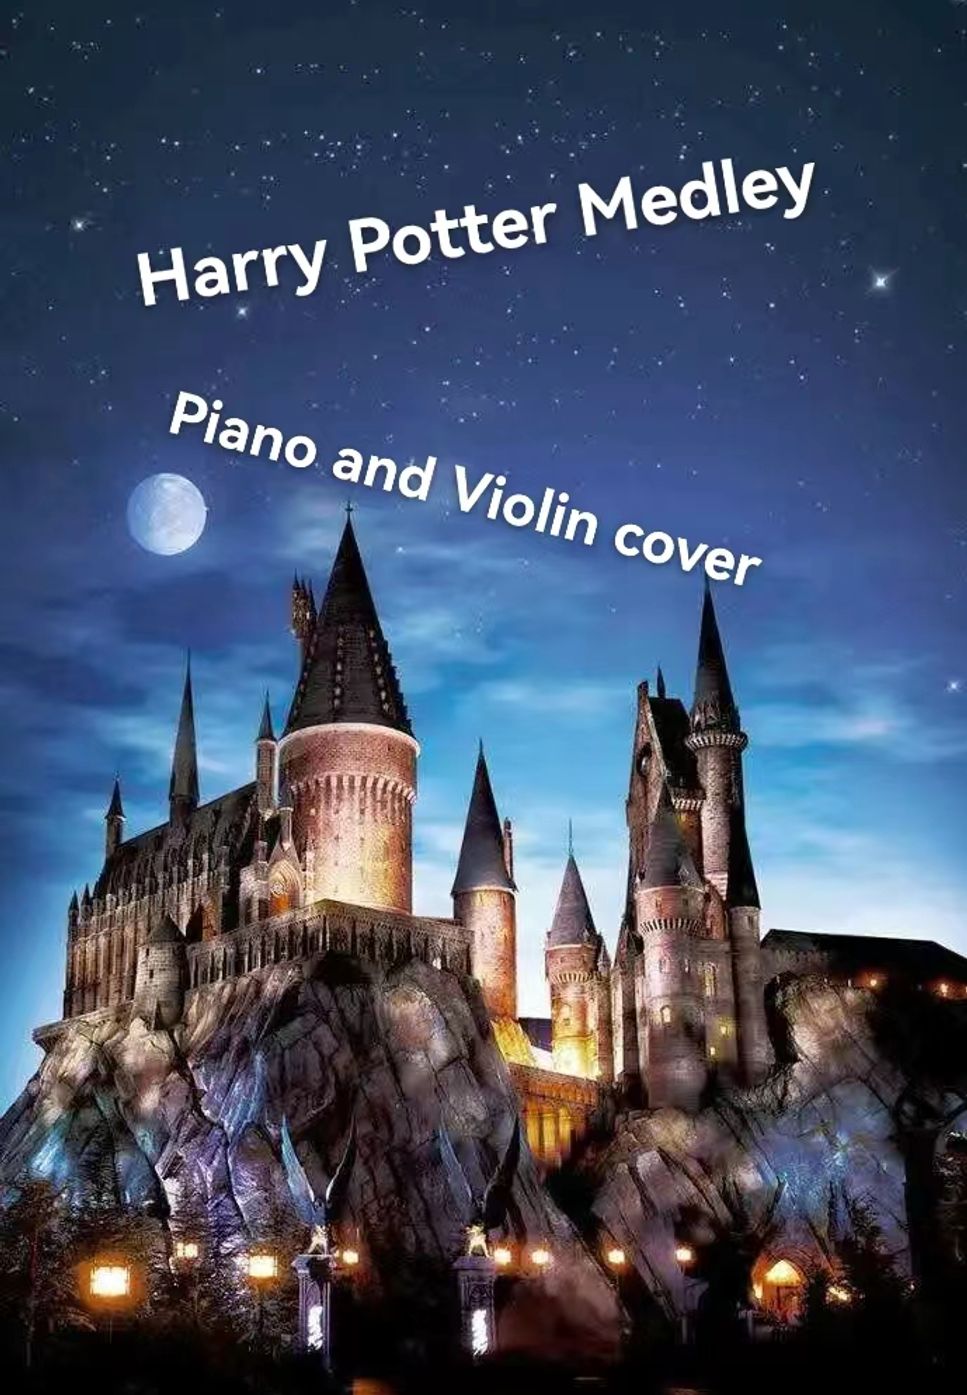 All Harry Potter soundtrack composers - Harry Potter Medley (A medley of Harry Potter OST) by Captain Harry Chen